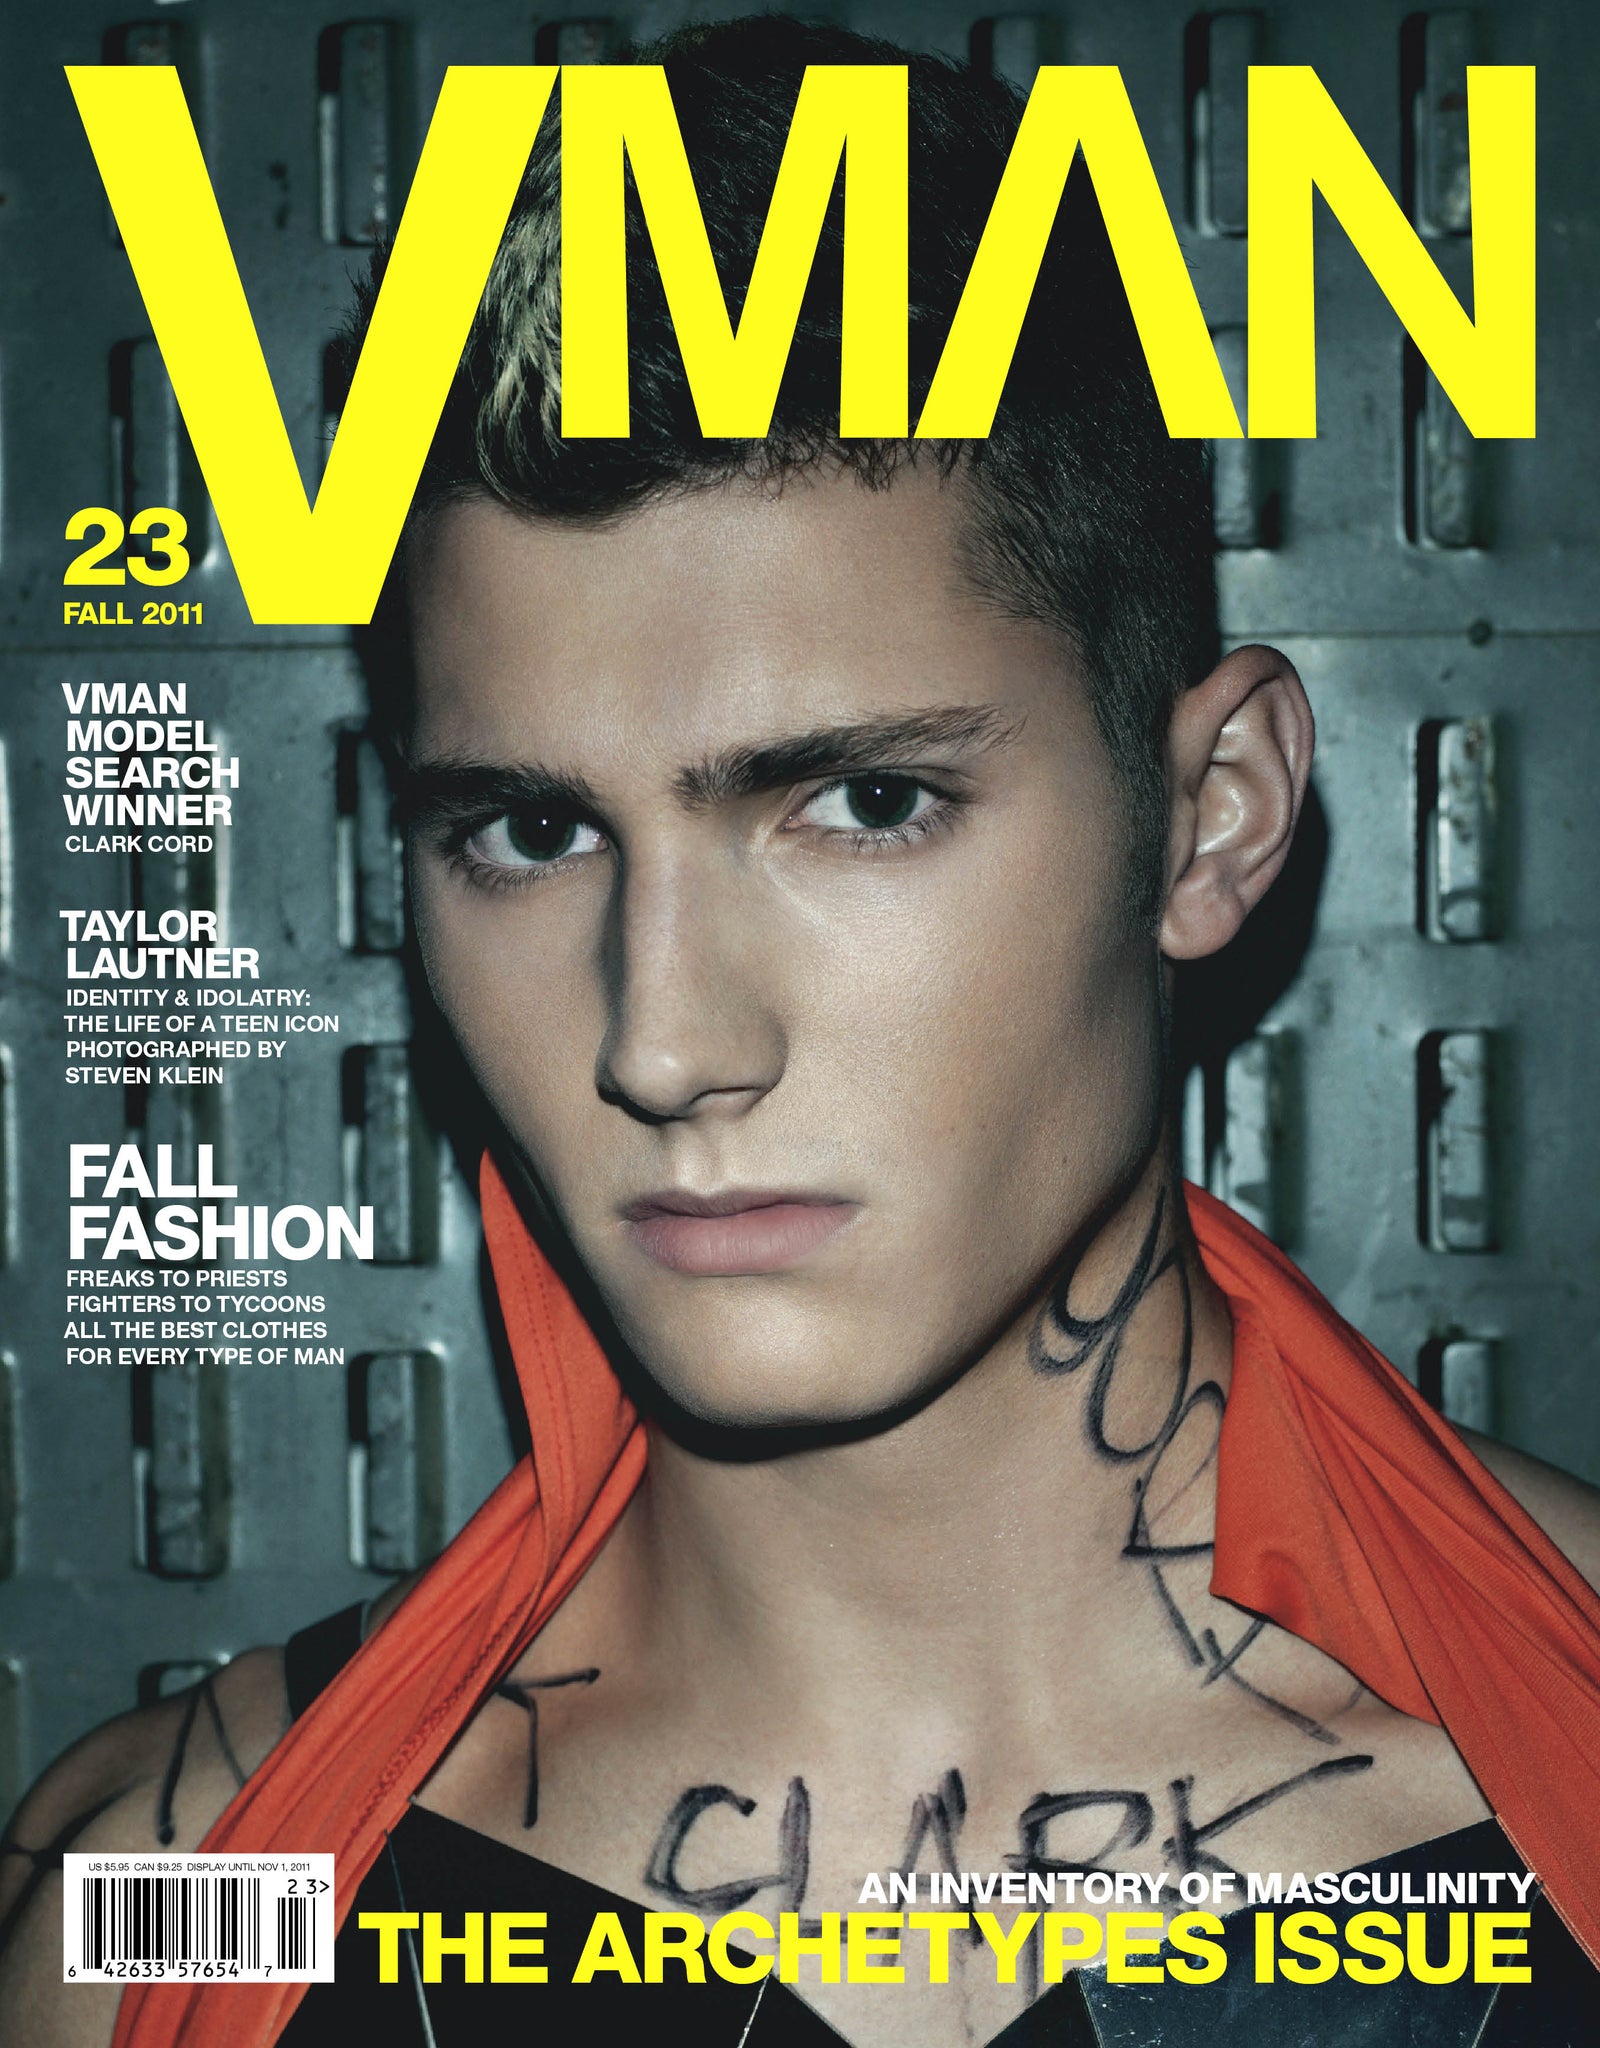 VMAN 23 THE ARCHETYPES ISSUE